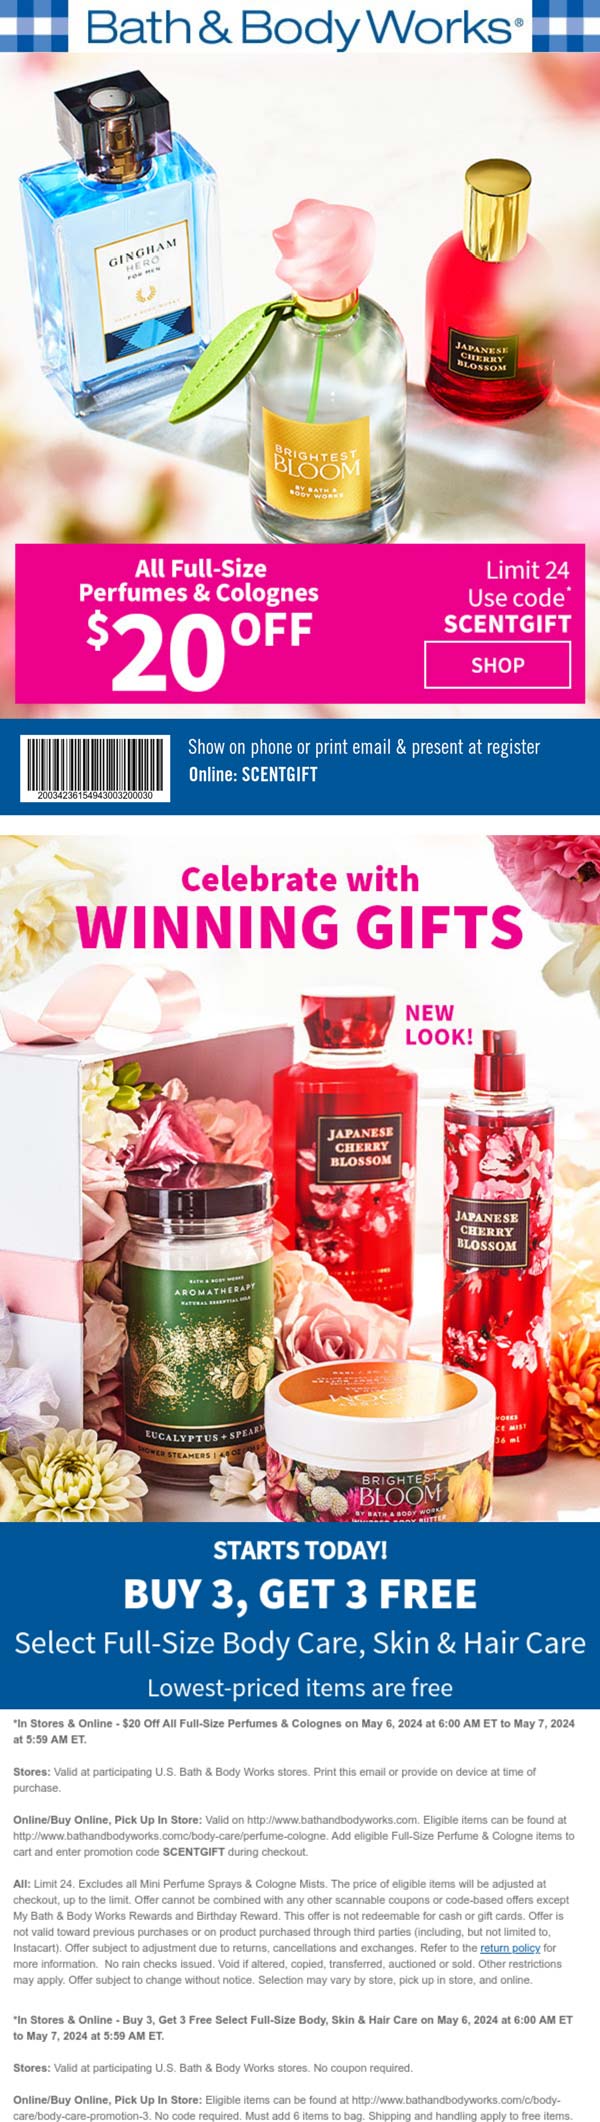 Bath & Body Works stores Coupon  $20 off perfumes & more today at Bath & Body Works, or online via promo code SCENTGIFT #bathbodyworks 